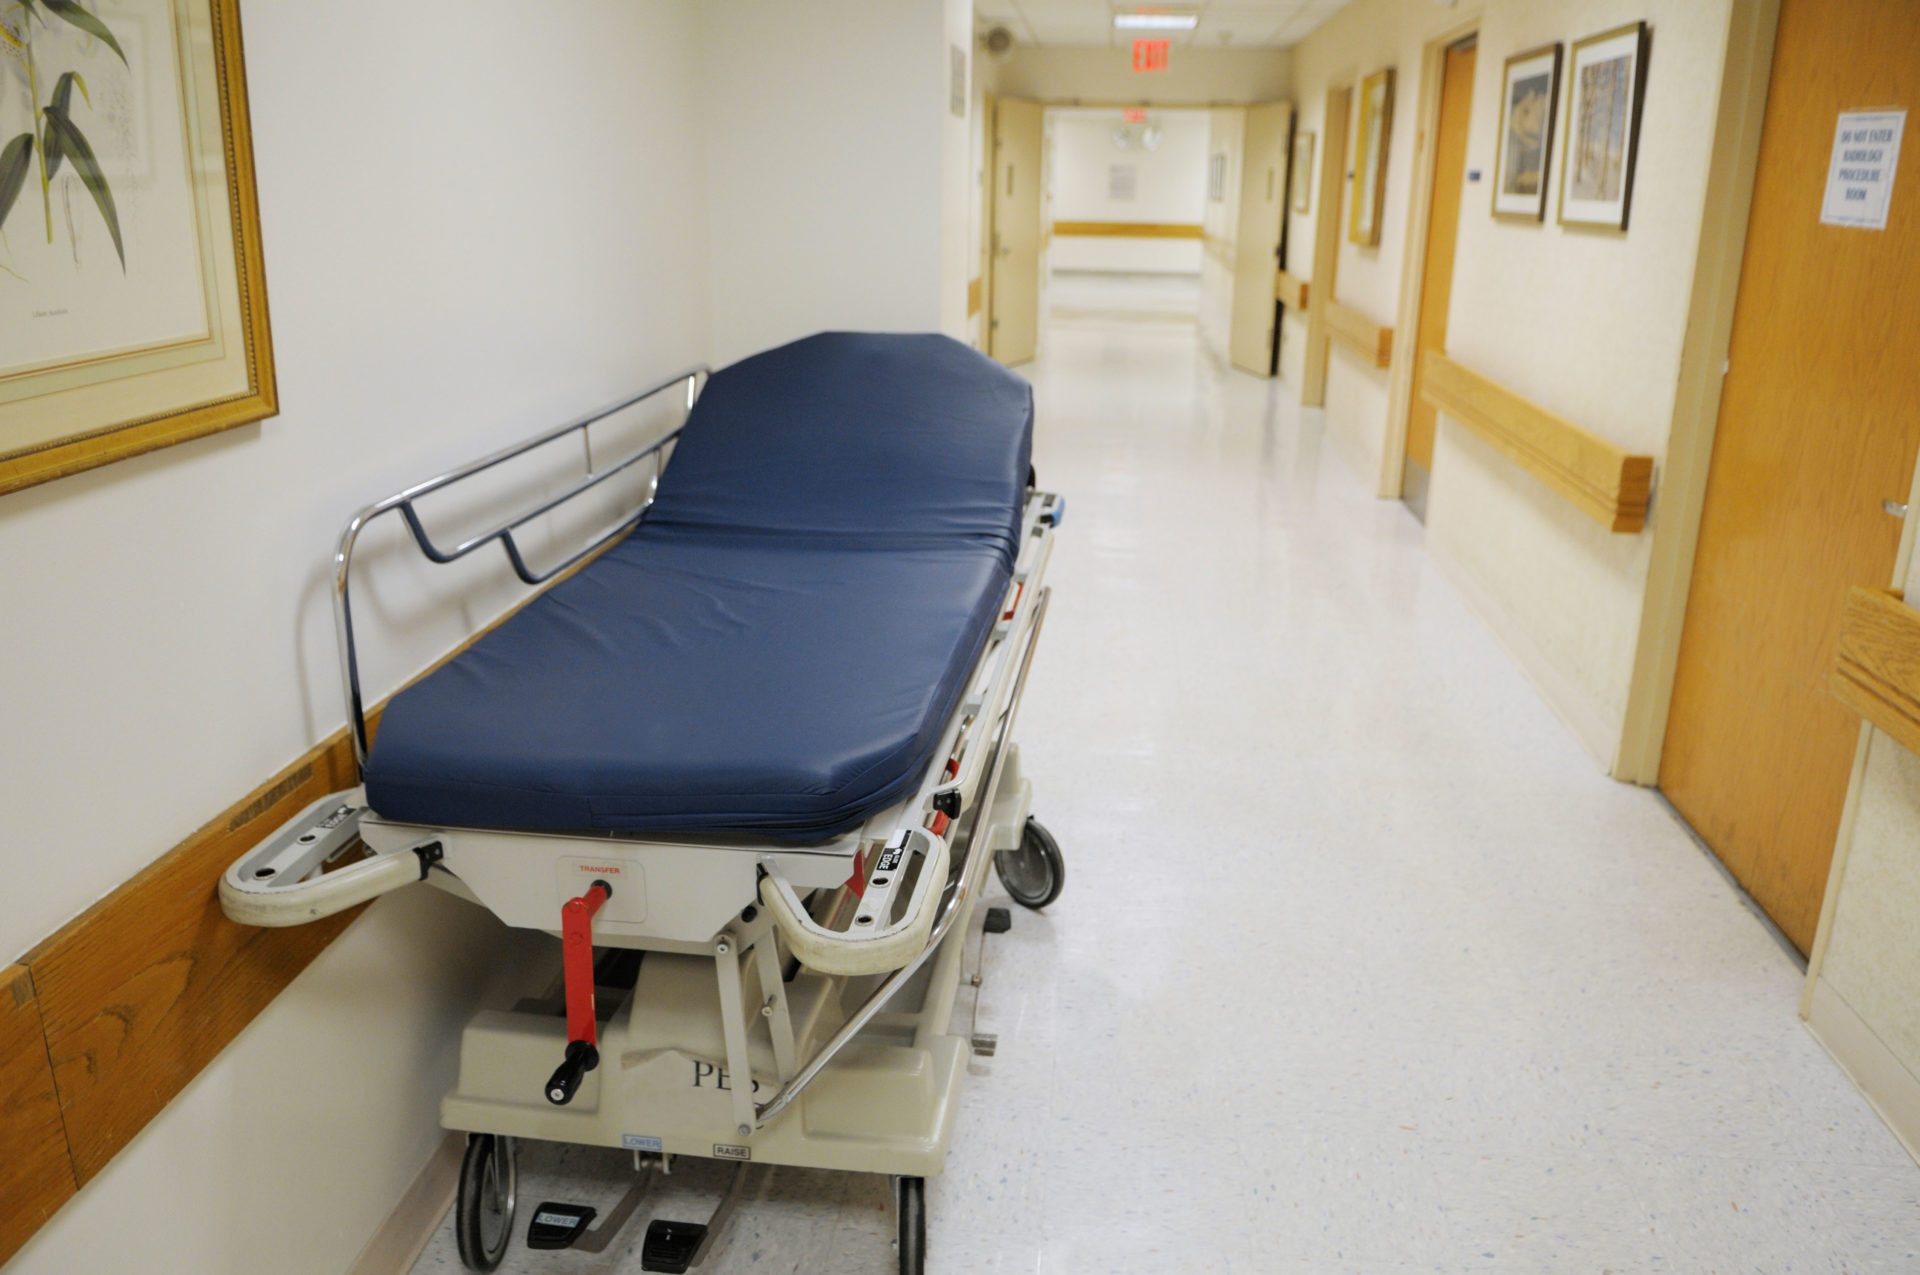 Hospital corridor with an empty trolley amid trolley crisis. Image: Martin Shields / Alamy Stock Photo